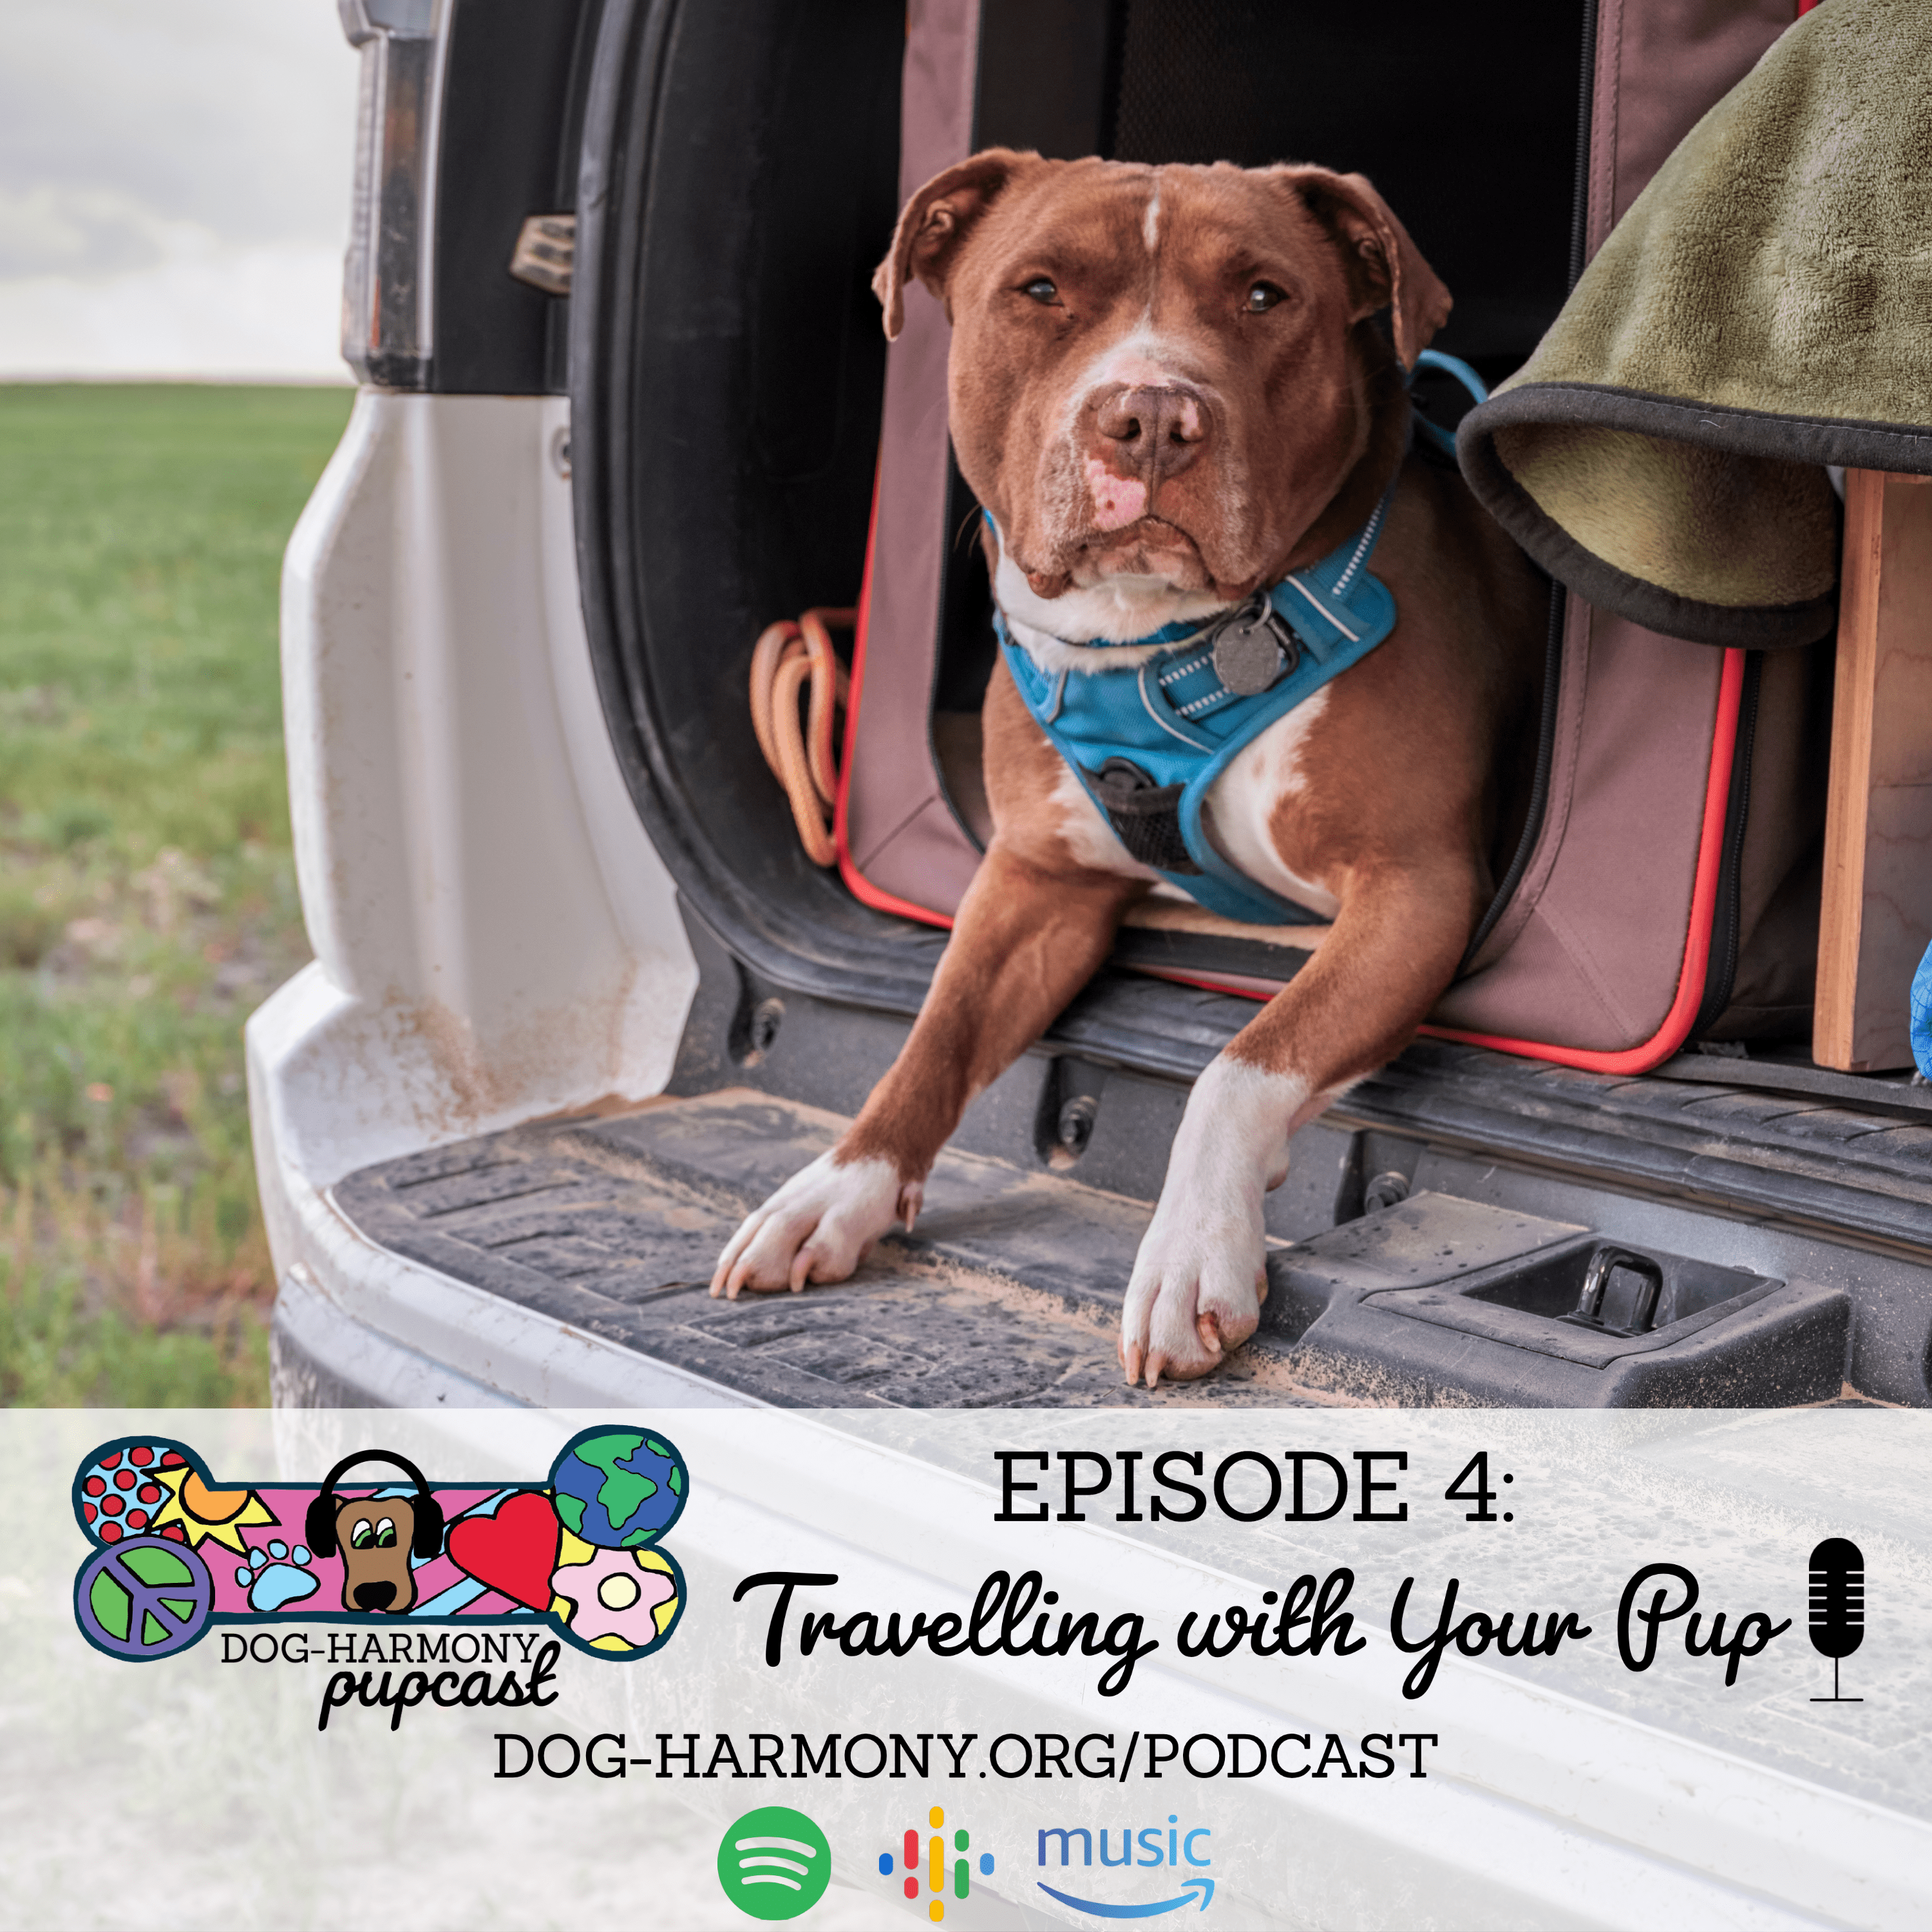 Episode 4: Travelling with Your Pup